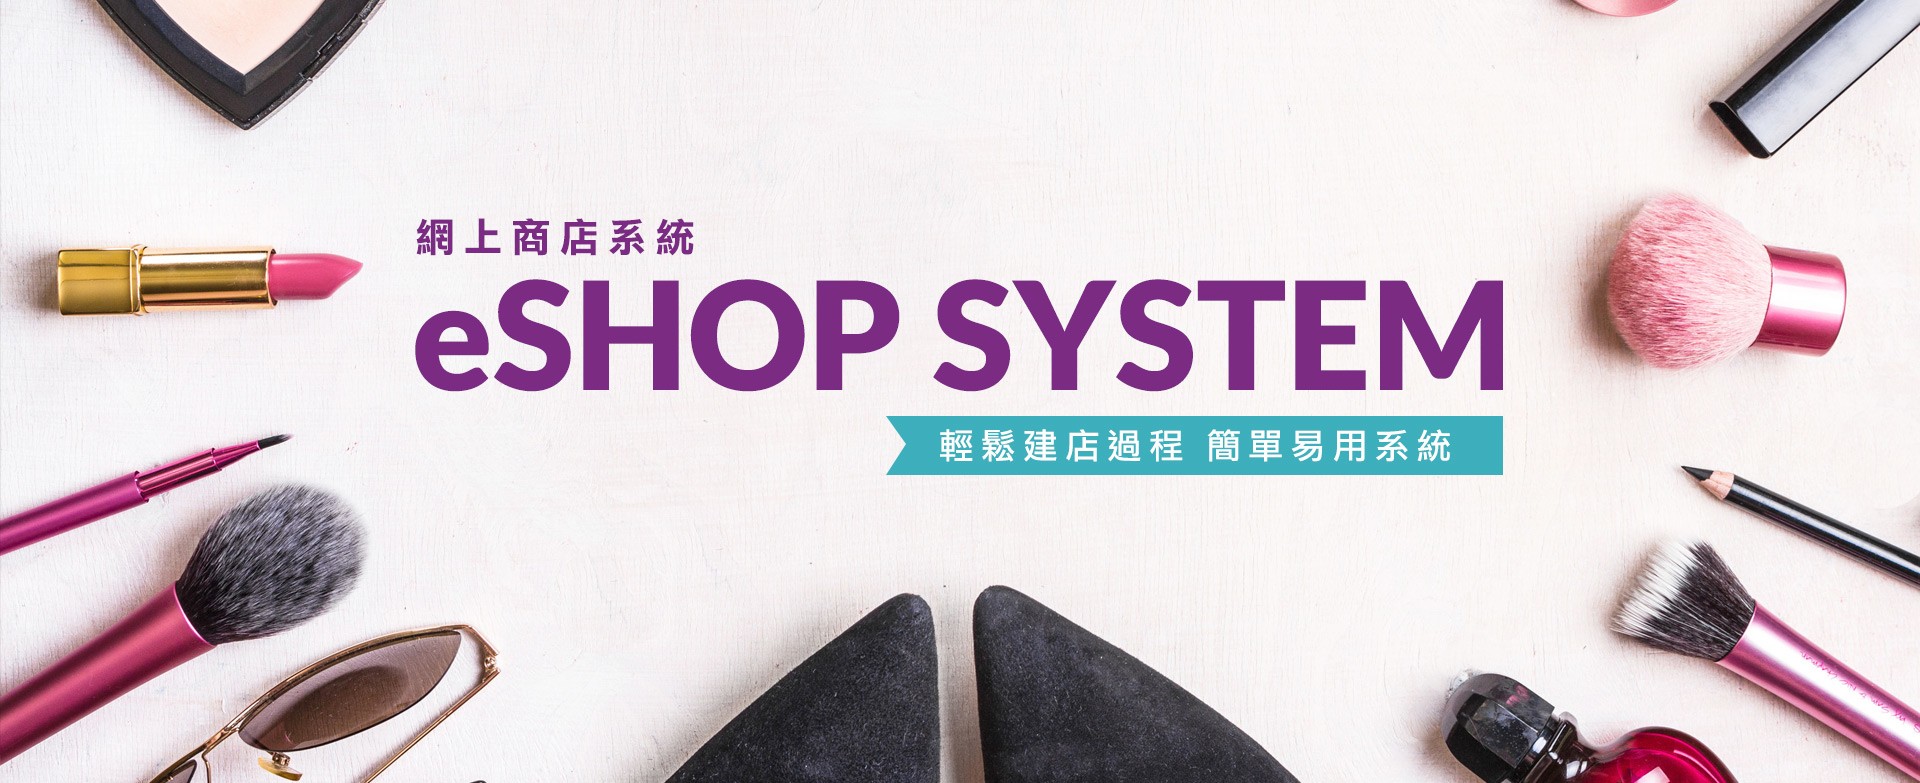 Easy to setup online shop with our robust eShop System